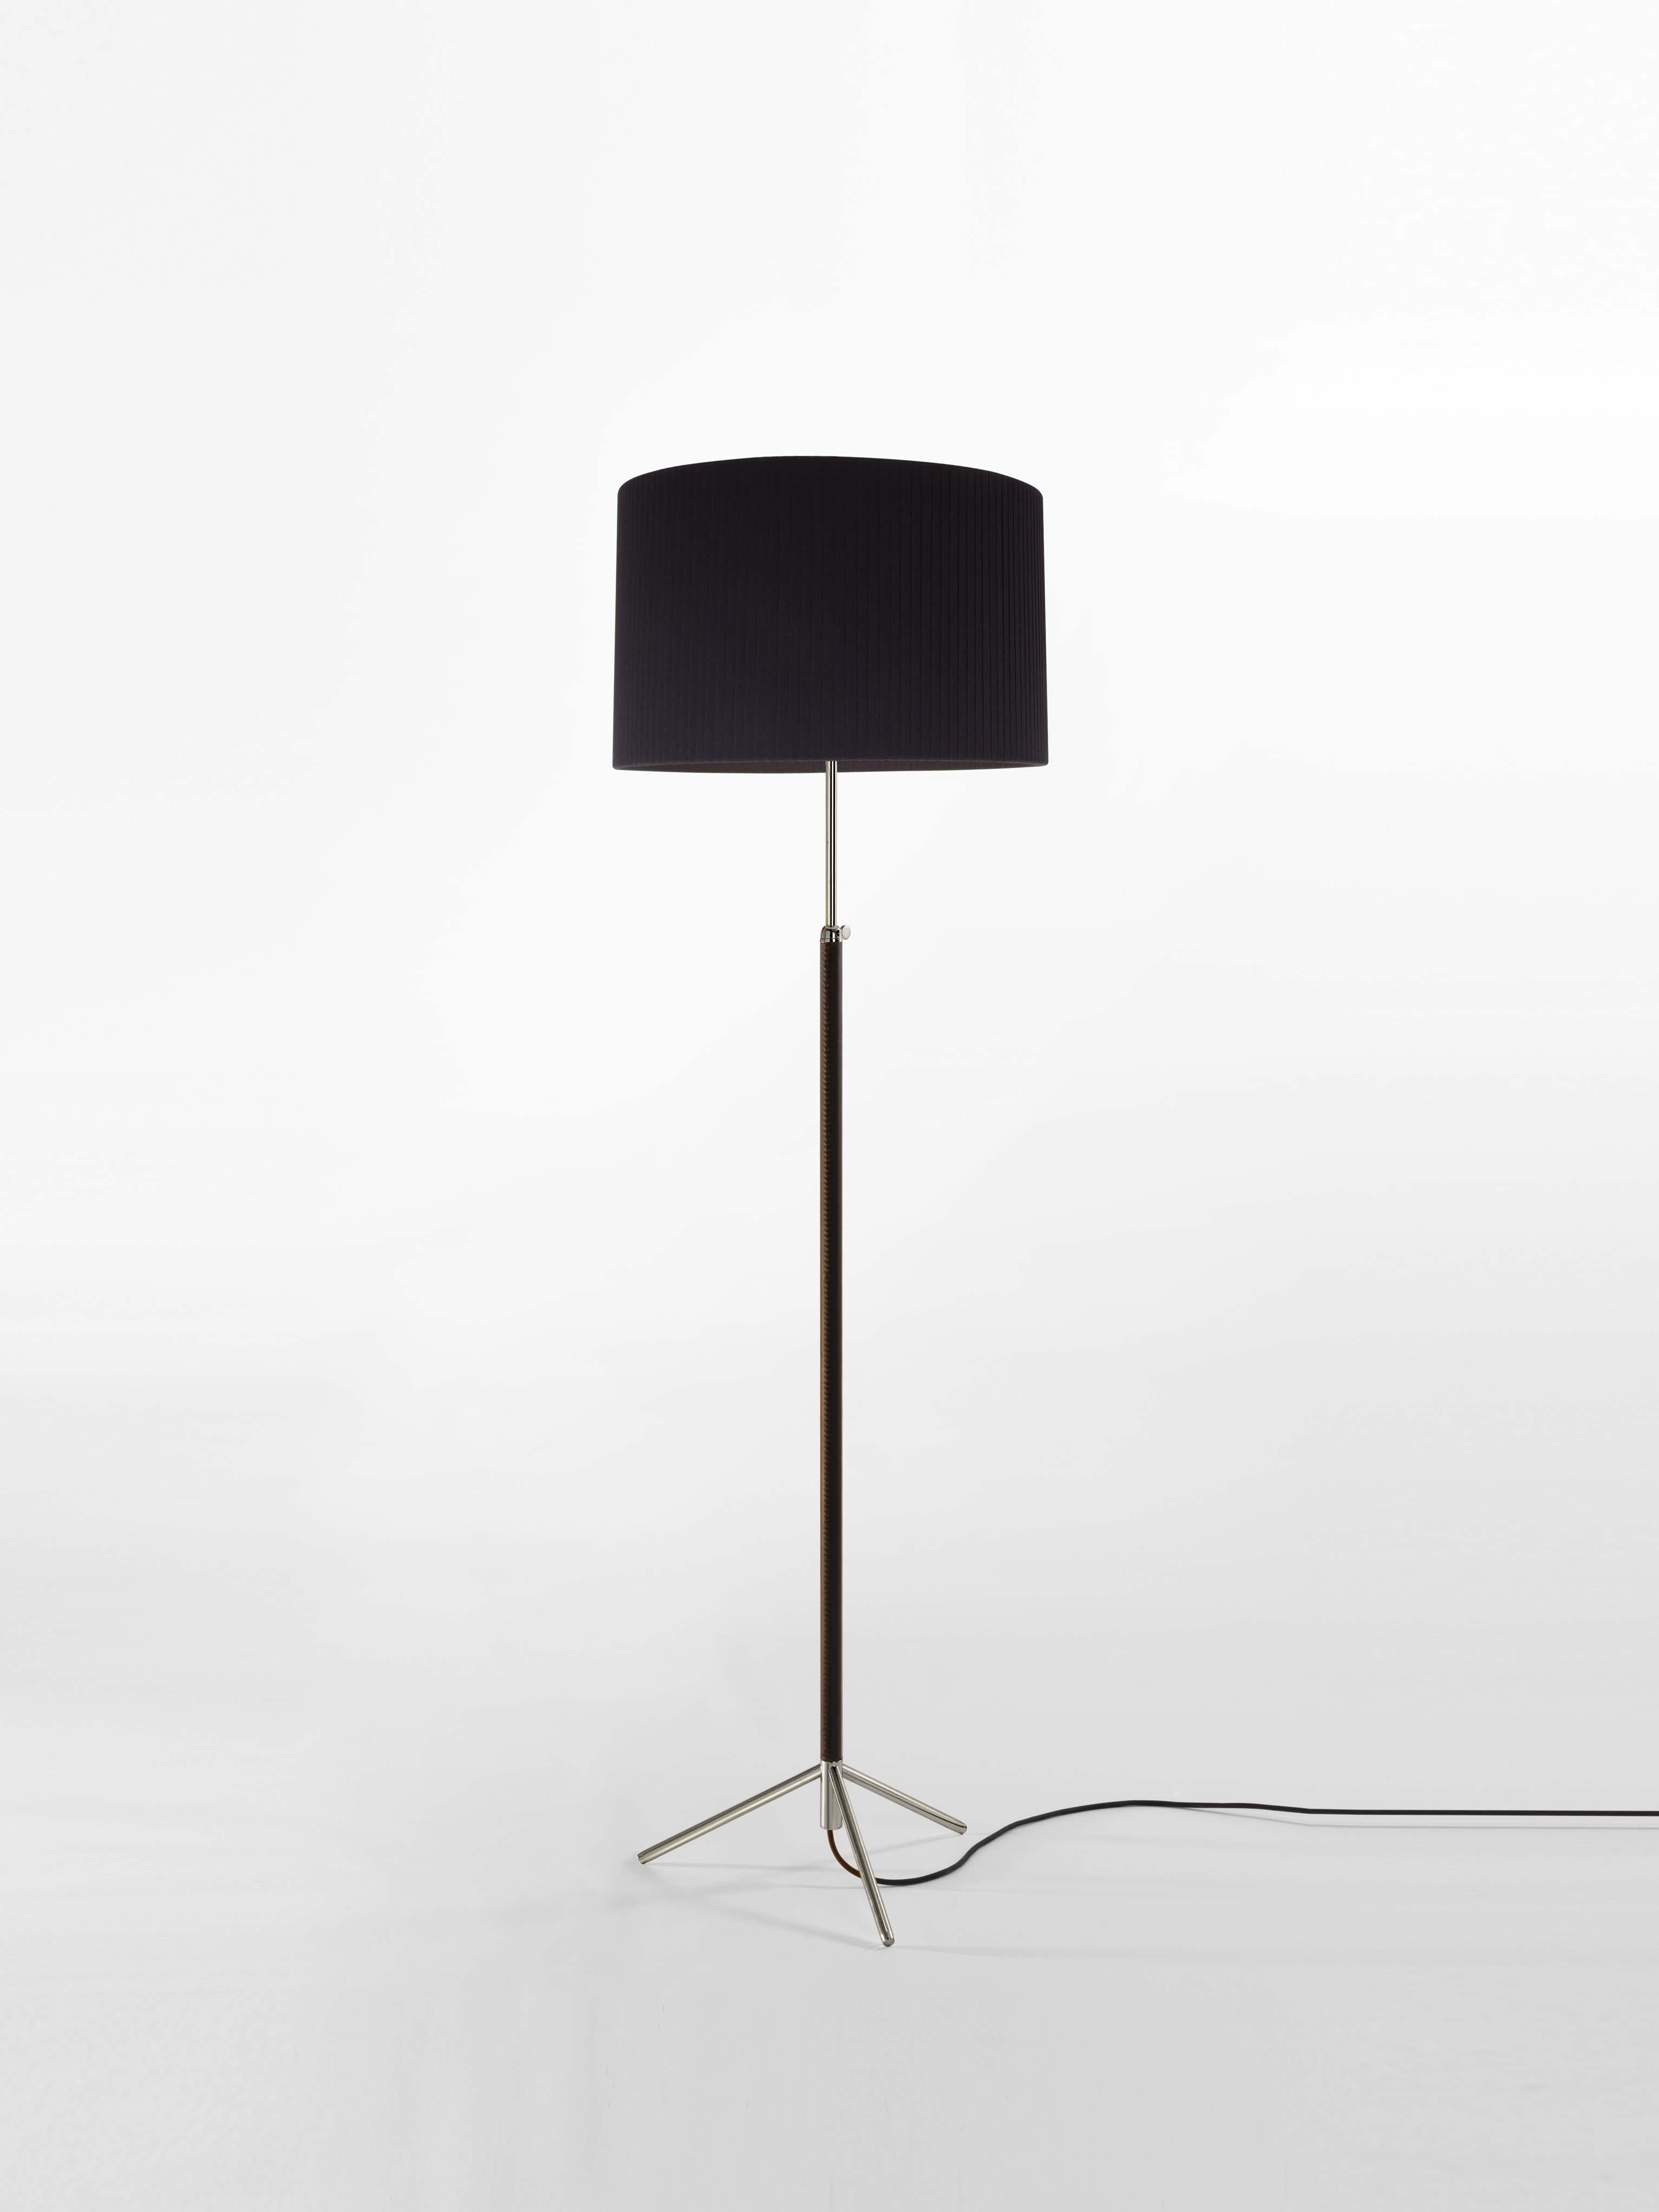 Black and chrome Pie de Salón G2 floor lamp by Jaume Sans
Dimensions: D 45 x H 120-160 cm
Materials: Metal, leather, ribbon.
Available in chrome-plated or polished brass structure.
Available in other shade colors and sizes.

This slender